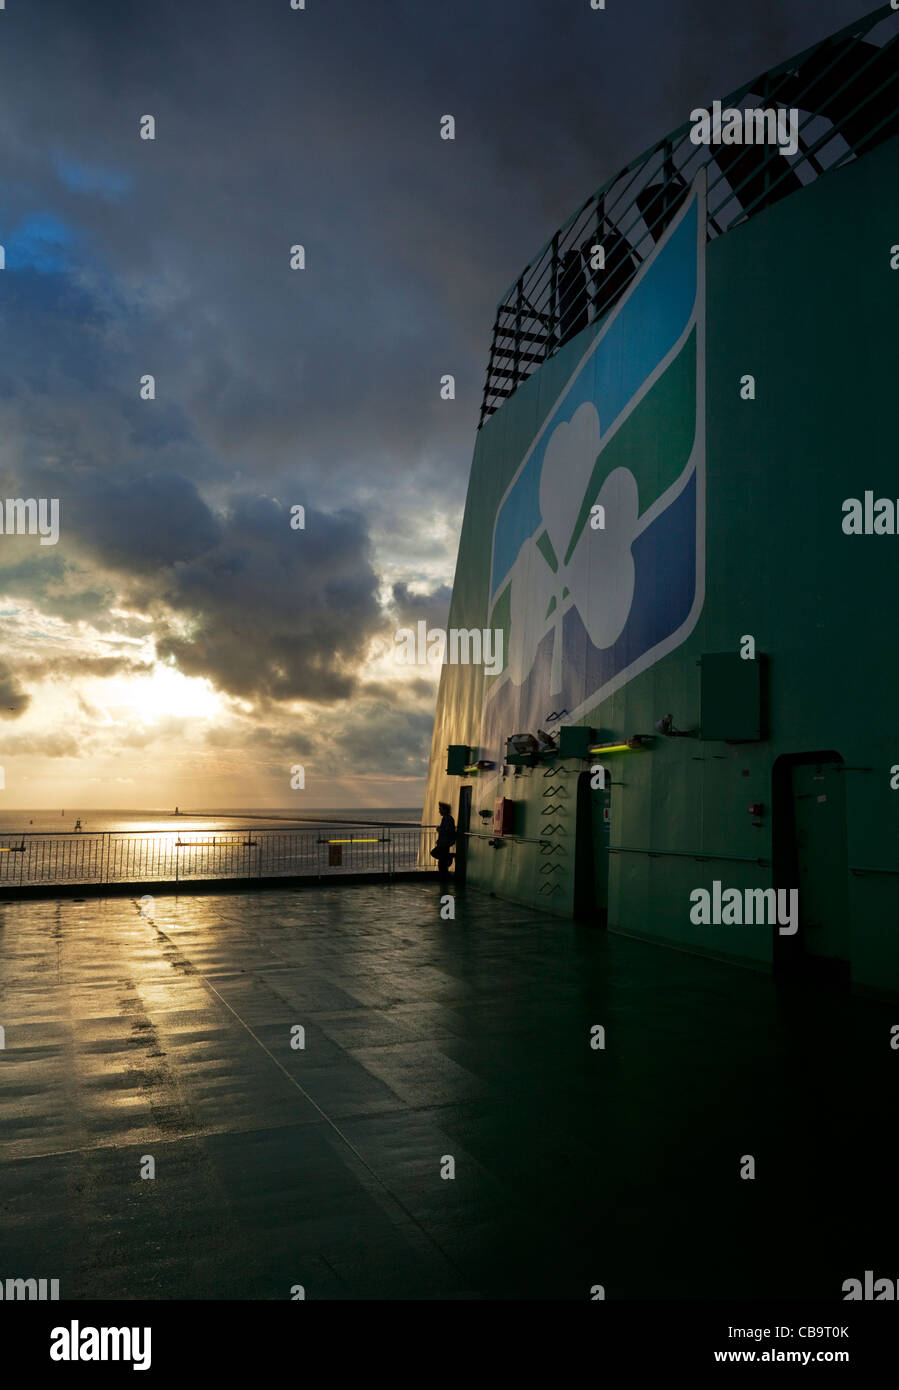 Funnel at dawn on the deck on the Irish Ferry 'Ulysses', Leaving Dublin Port and The River Liffey, Ireland Stock Photo